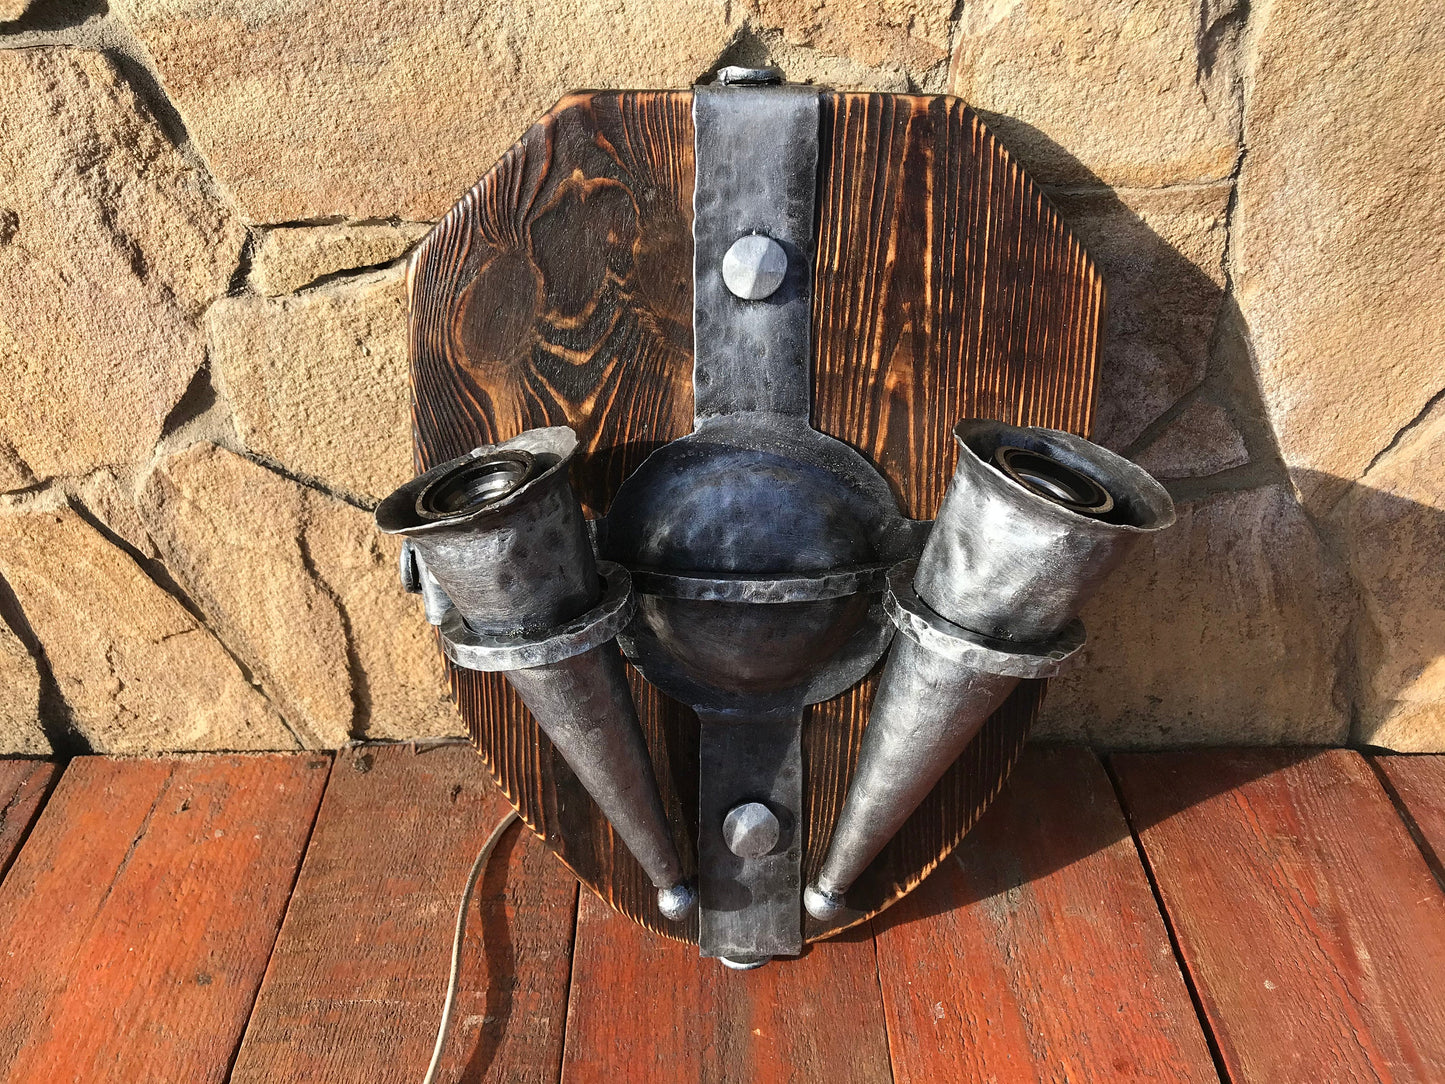 Wall sconce, medieval, midcentury, prehistoric, cave, castle, viking, rustic, porch lantern, shield, medieval gift, cave wall art, torch